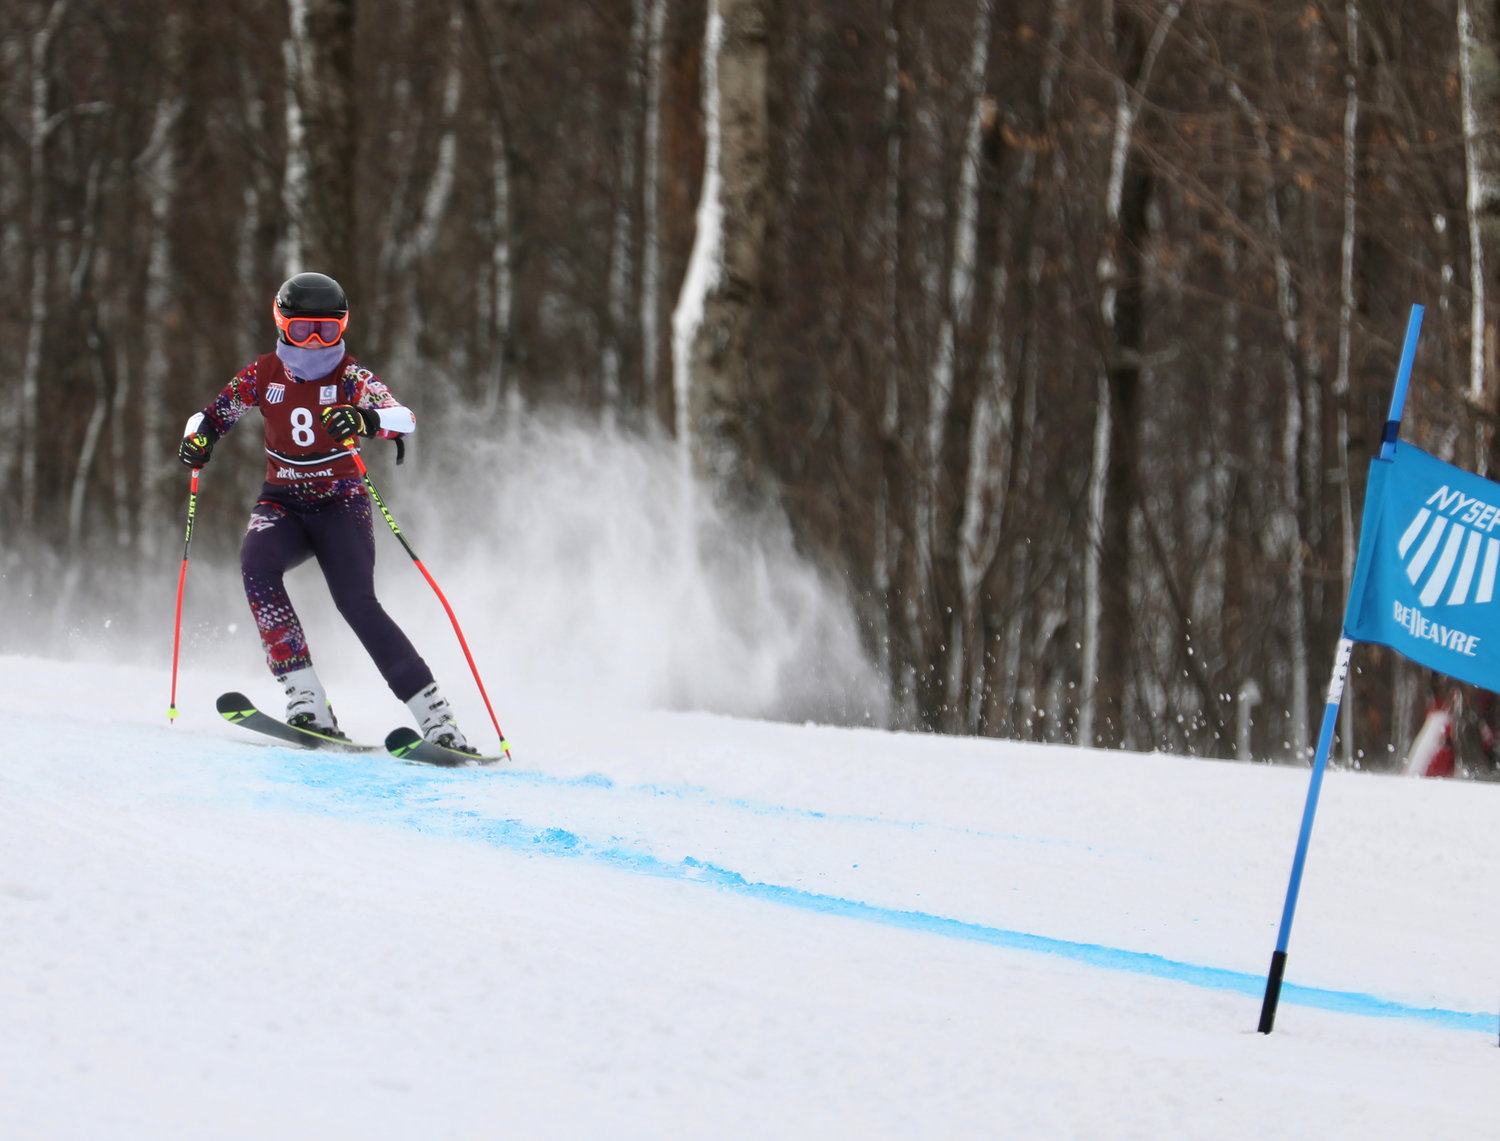 Fellow Lady Panther Harly Taylor took second in the day’s races among the girls skiers.